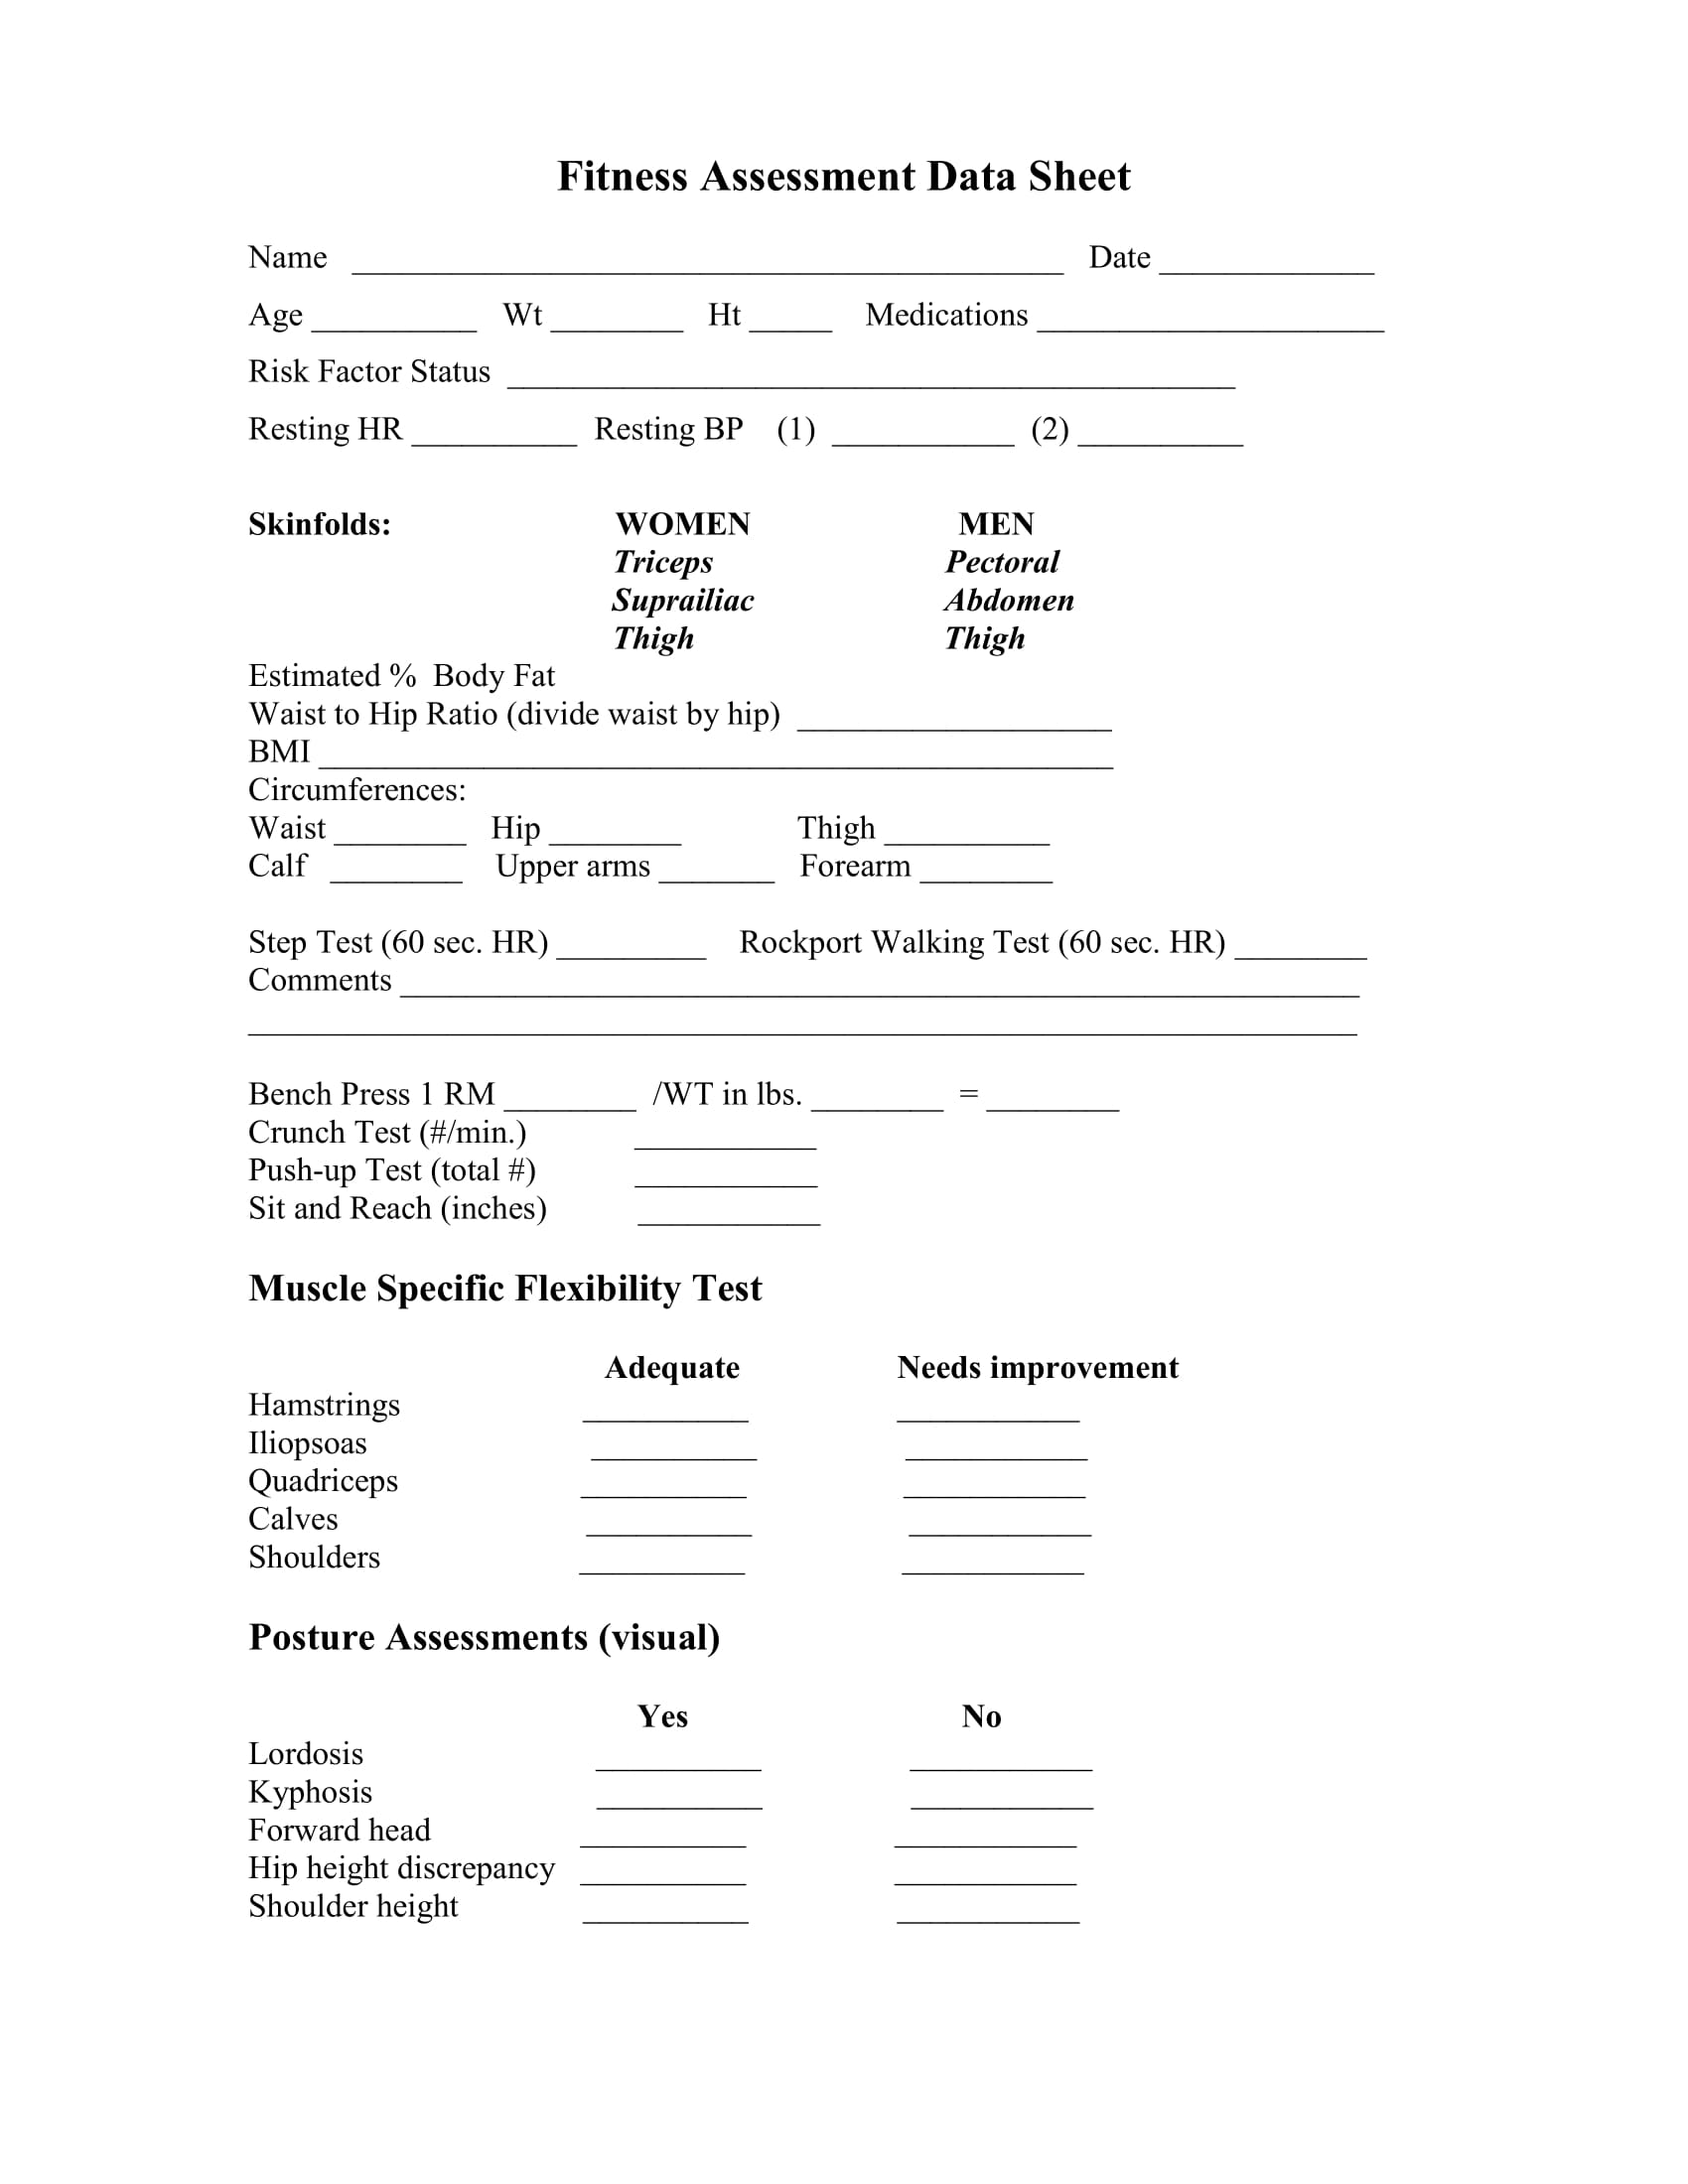 printable-personal-training-client-assessment-forms-printable-forms